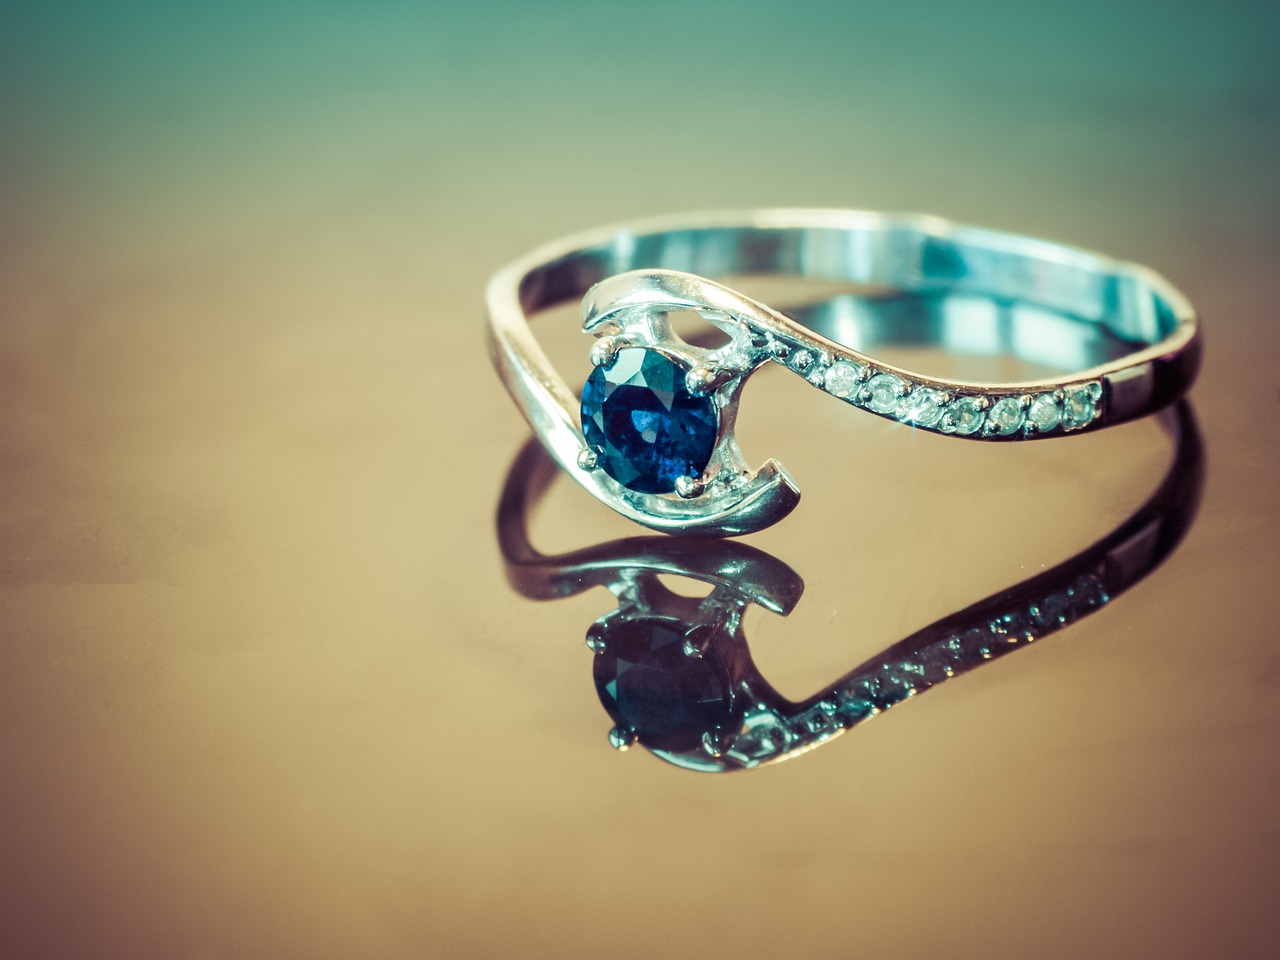 A diamond and sapphire engagement ring.